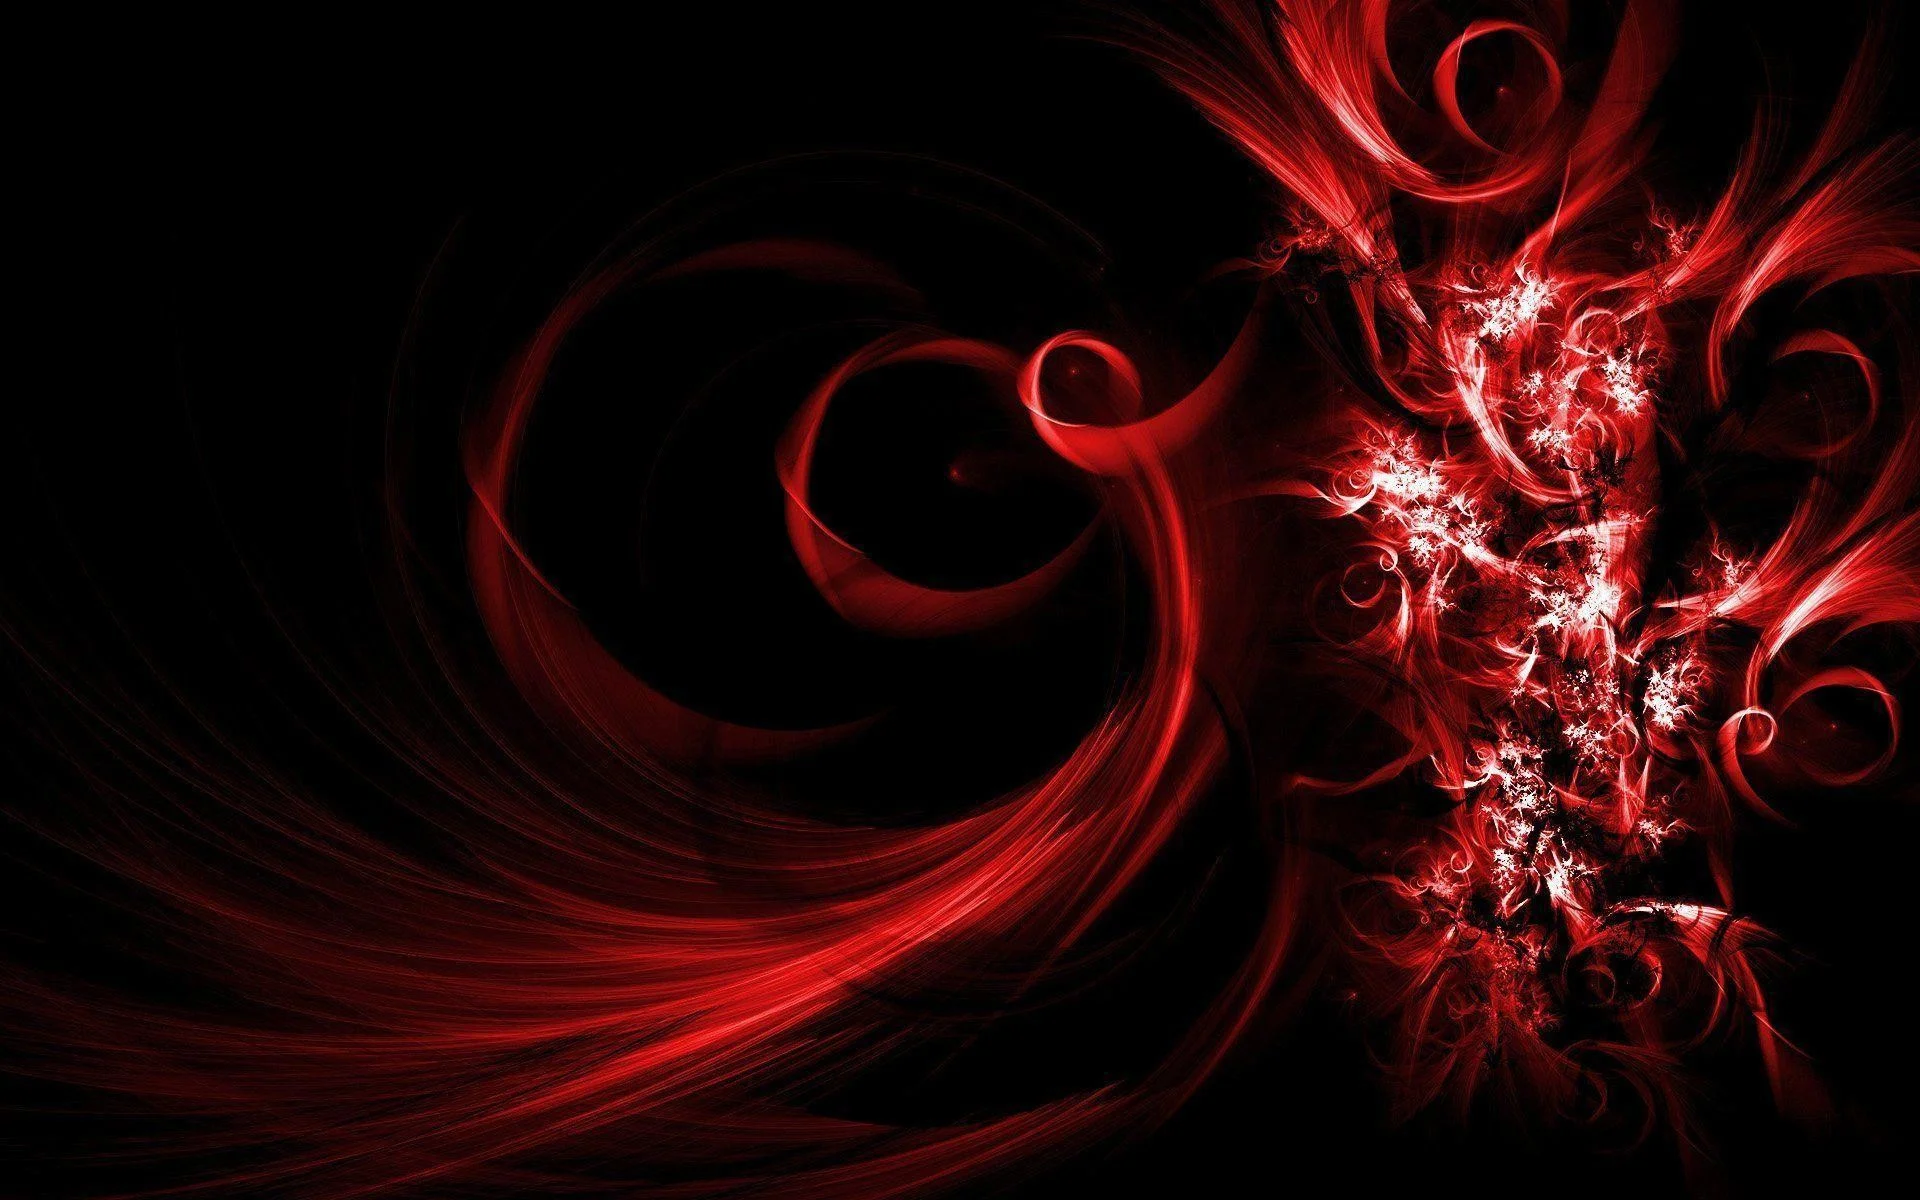 Black And Red Abstract Wallpaper Hd 1080P 12 HD Wallpapers 